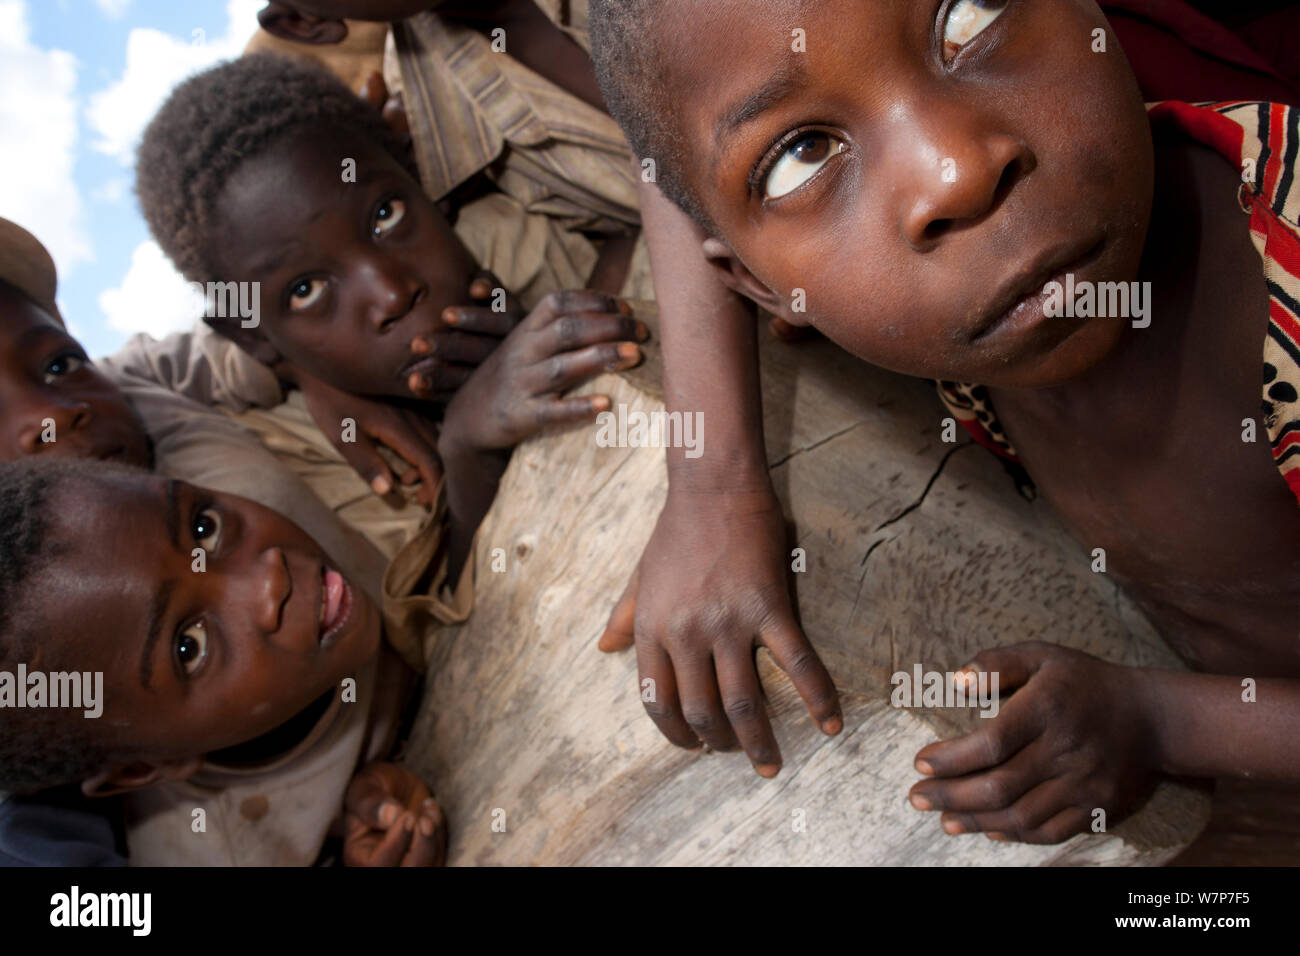 Mozambican children interested in camera. Pemba to Montepuez highway, north-eastern Mozambique, November 2011. Stock Photo